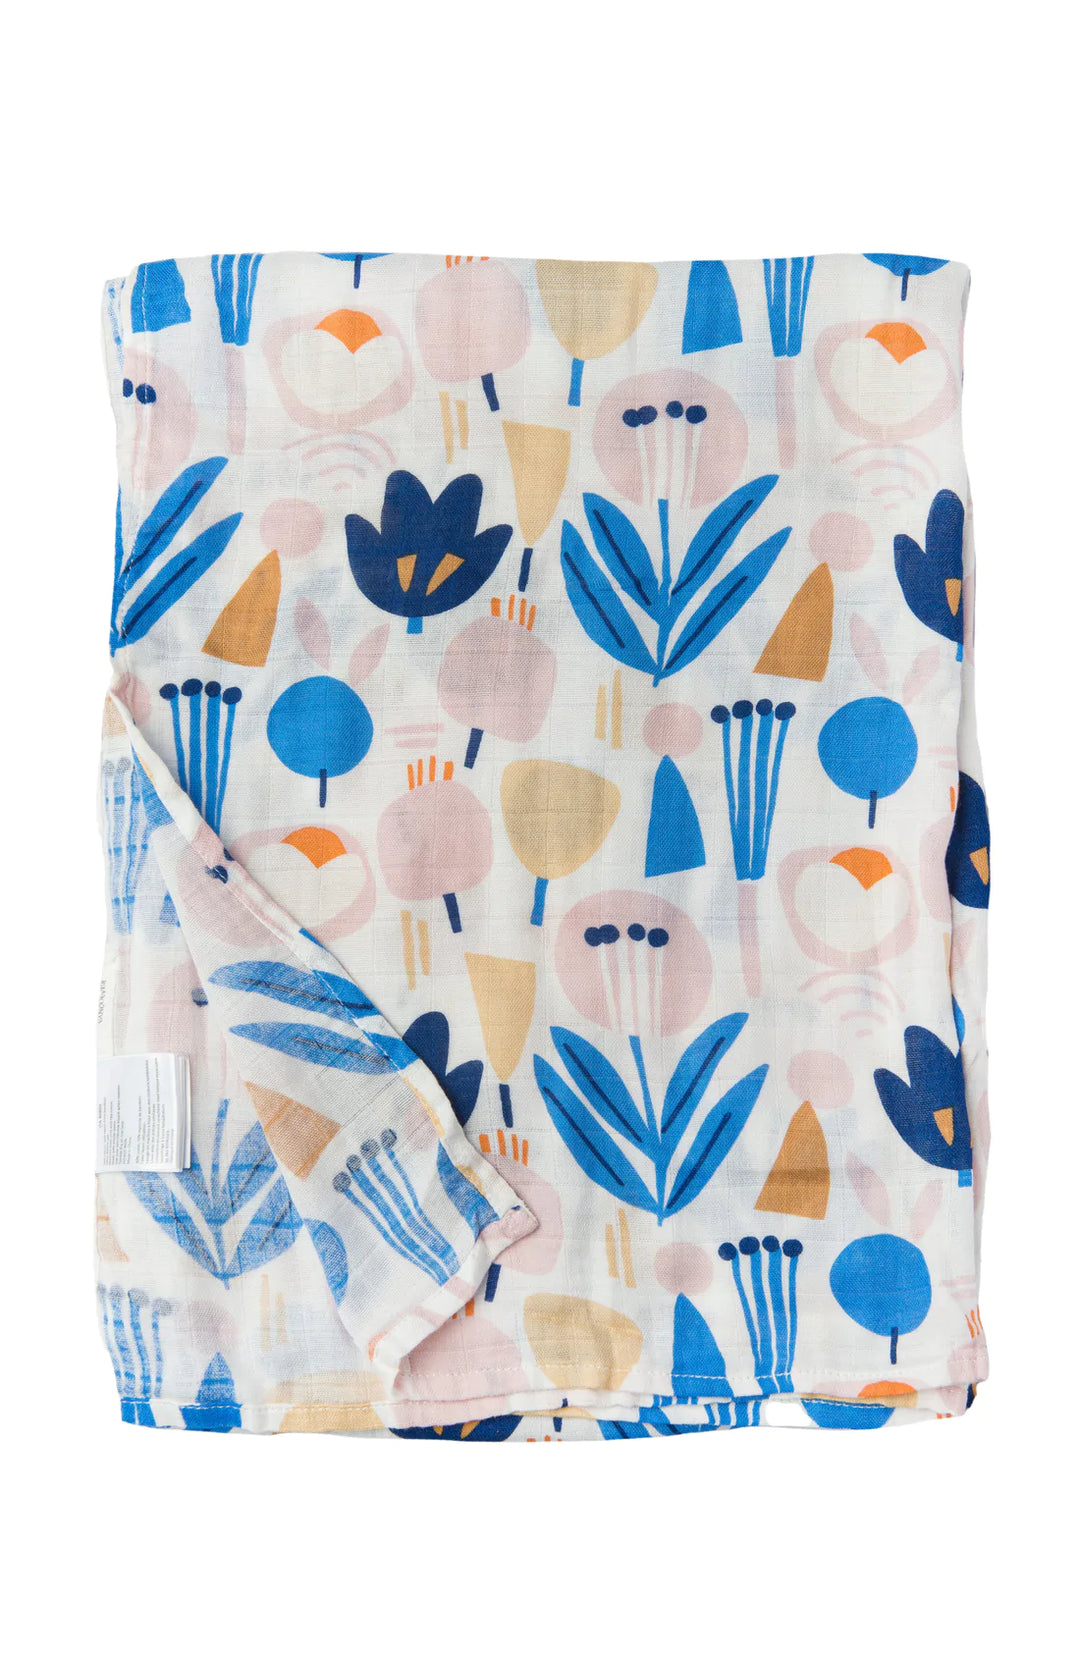 Scandi Floral Swaddle by Loulou Lollipop